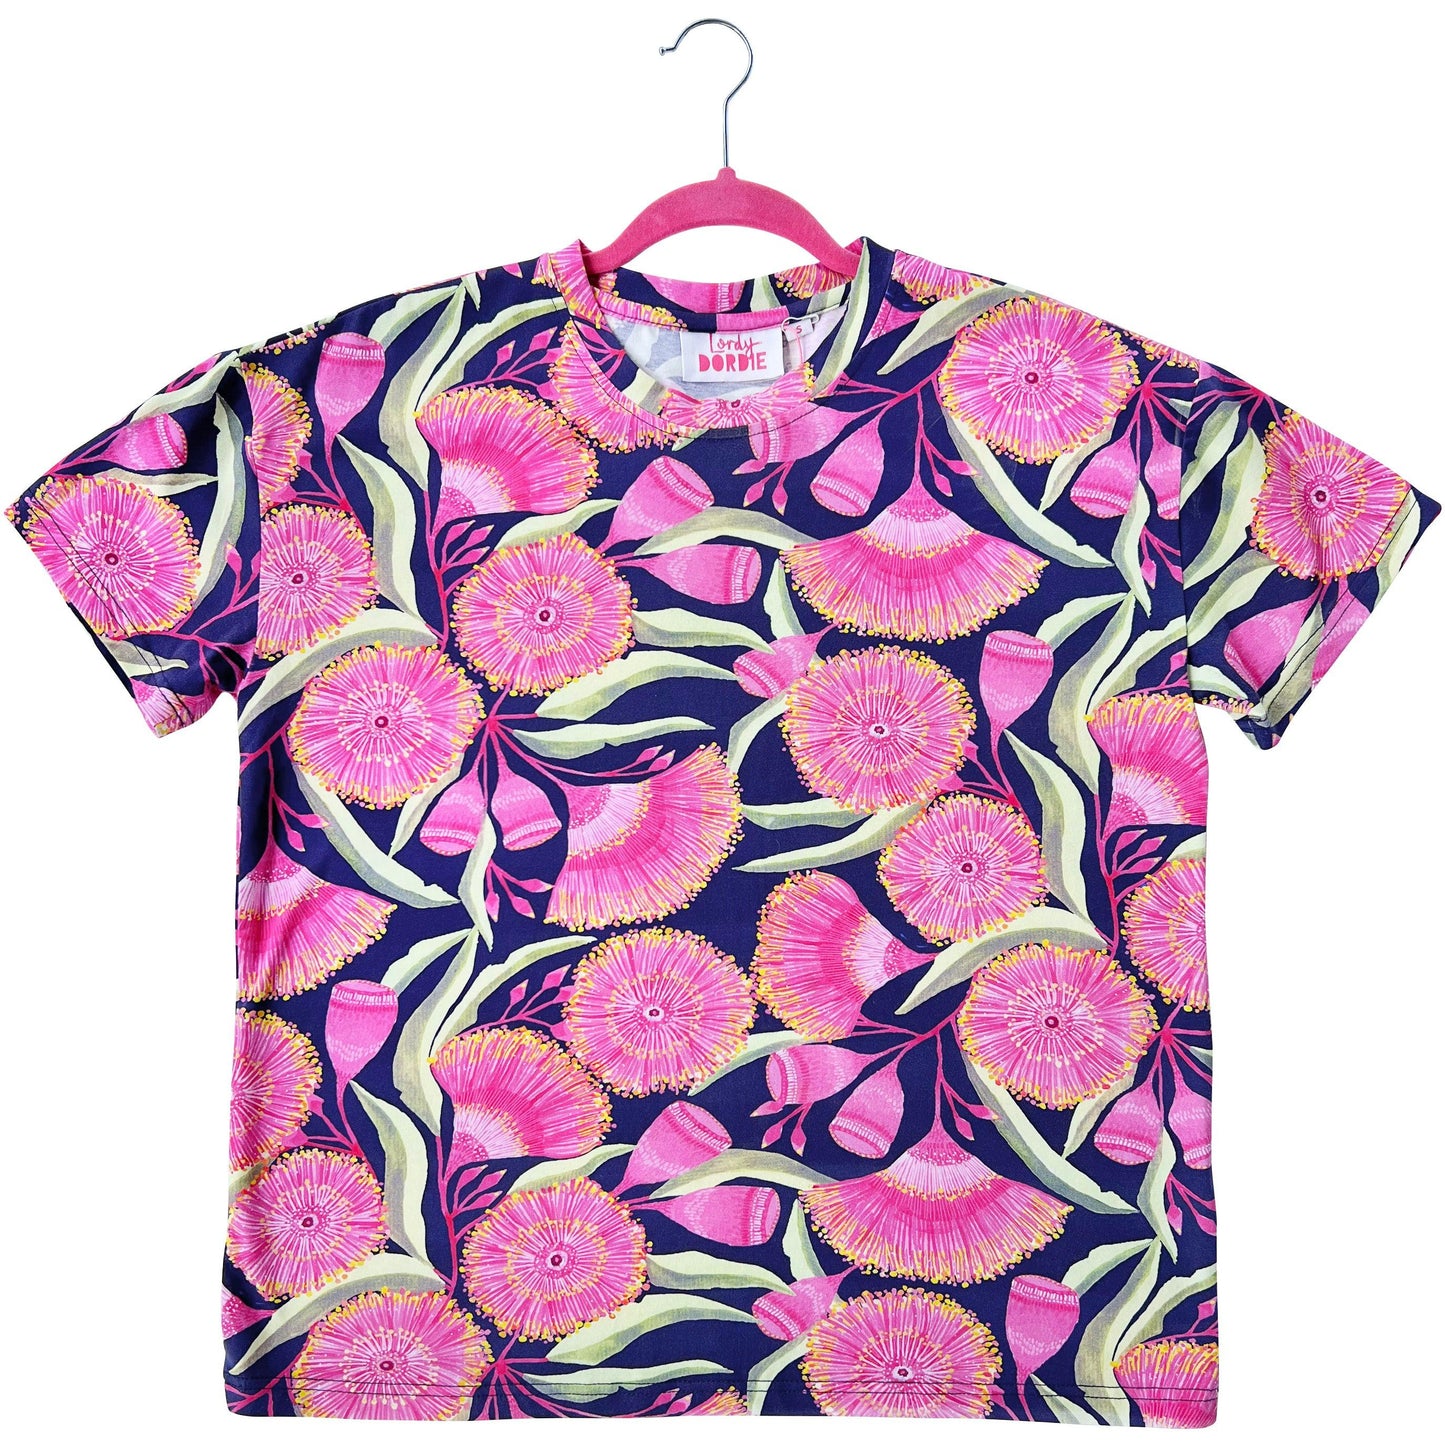 Gum Blossoms (Navy) - OVER EASY TEE - Lordy Dordie Art